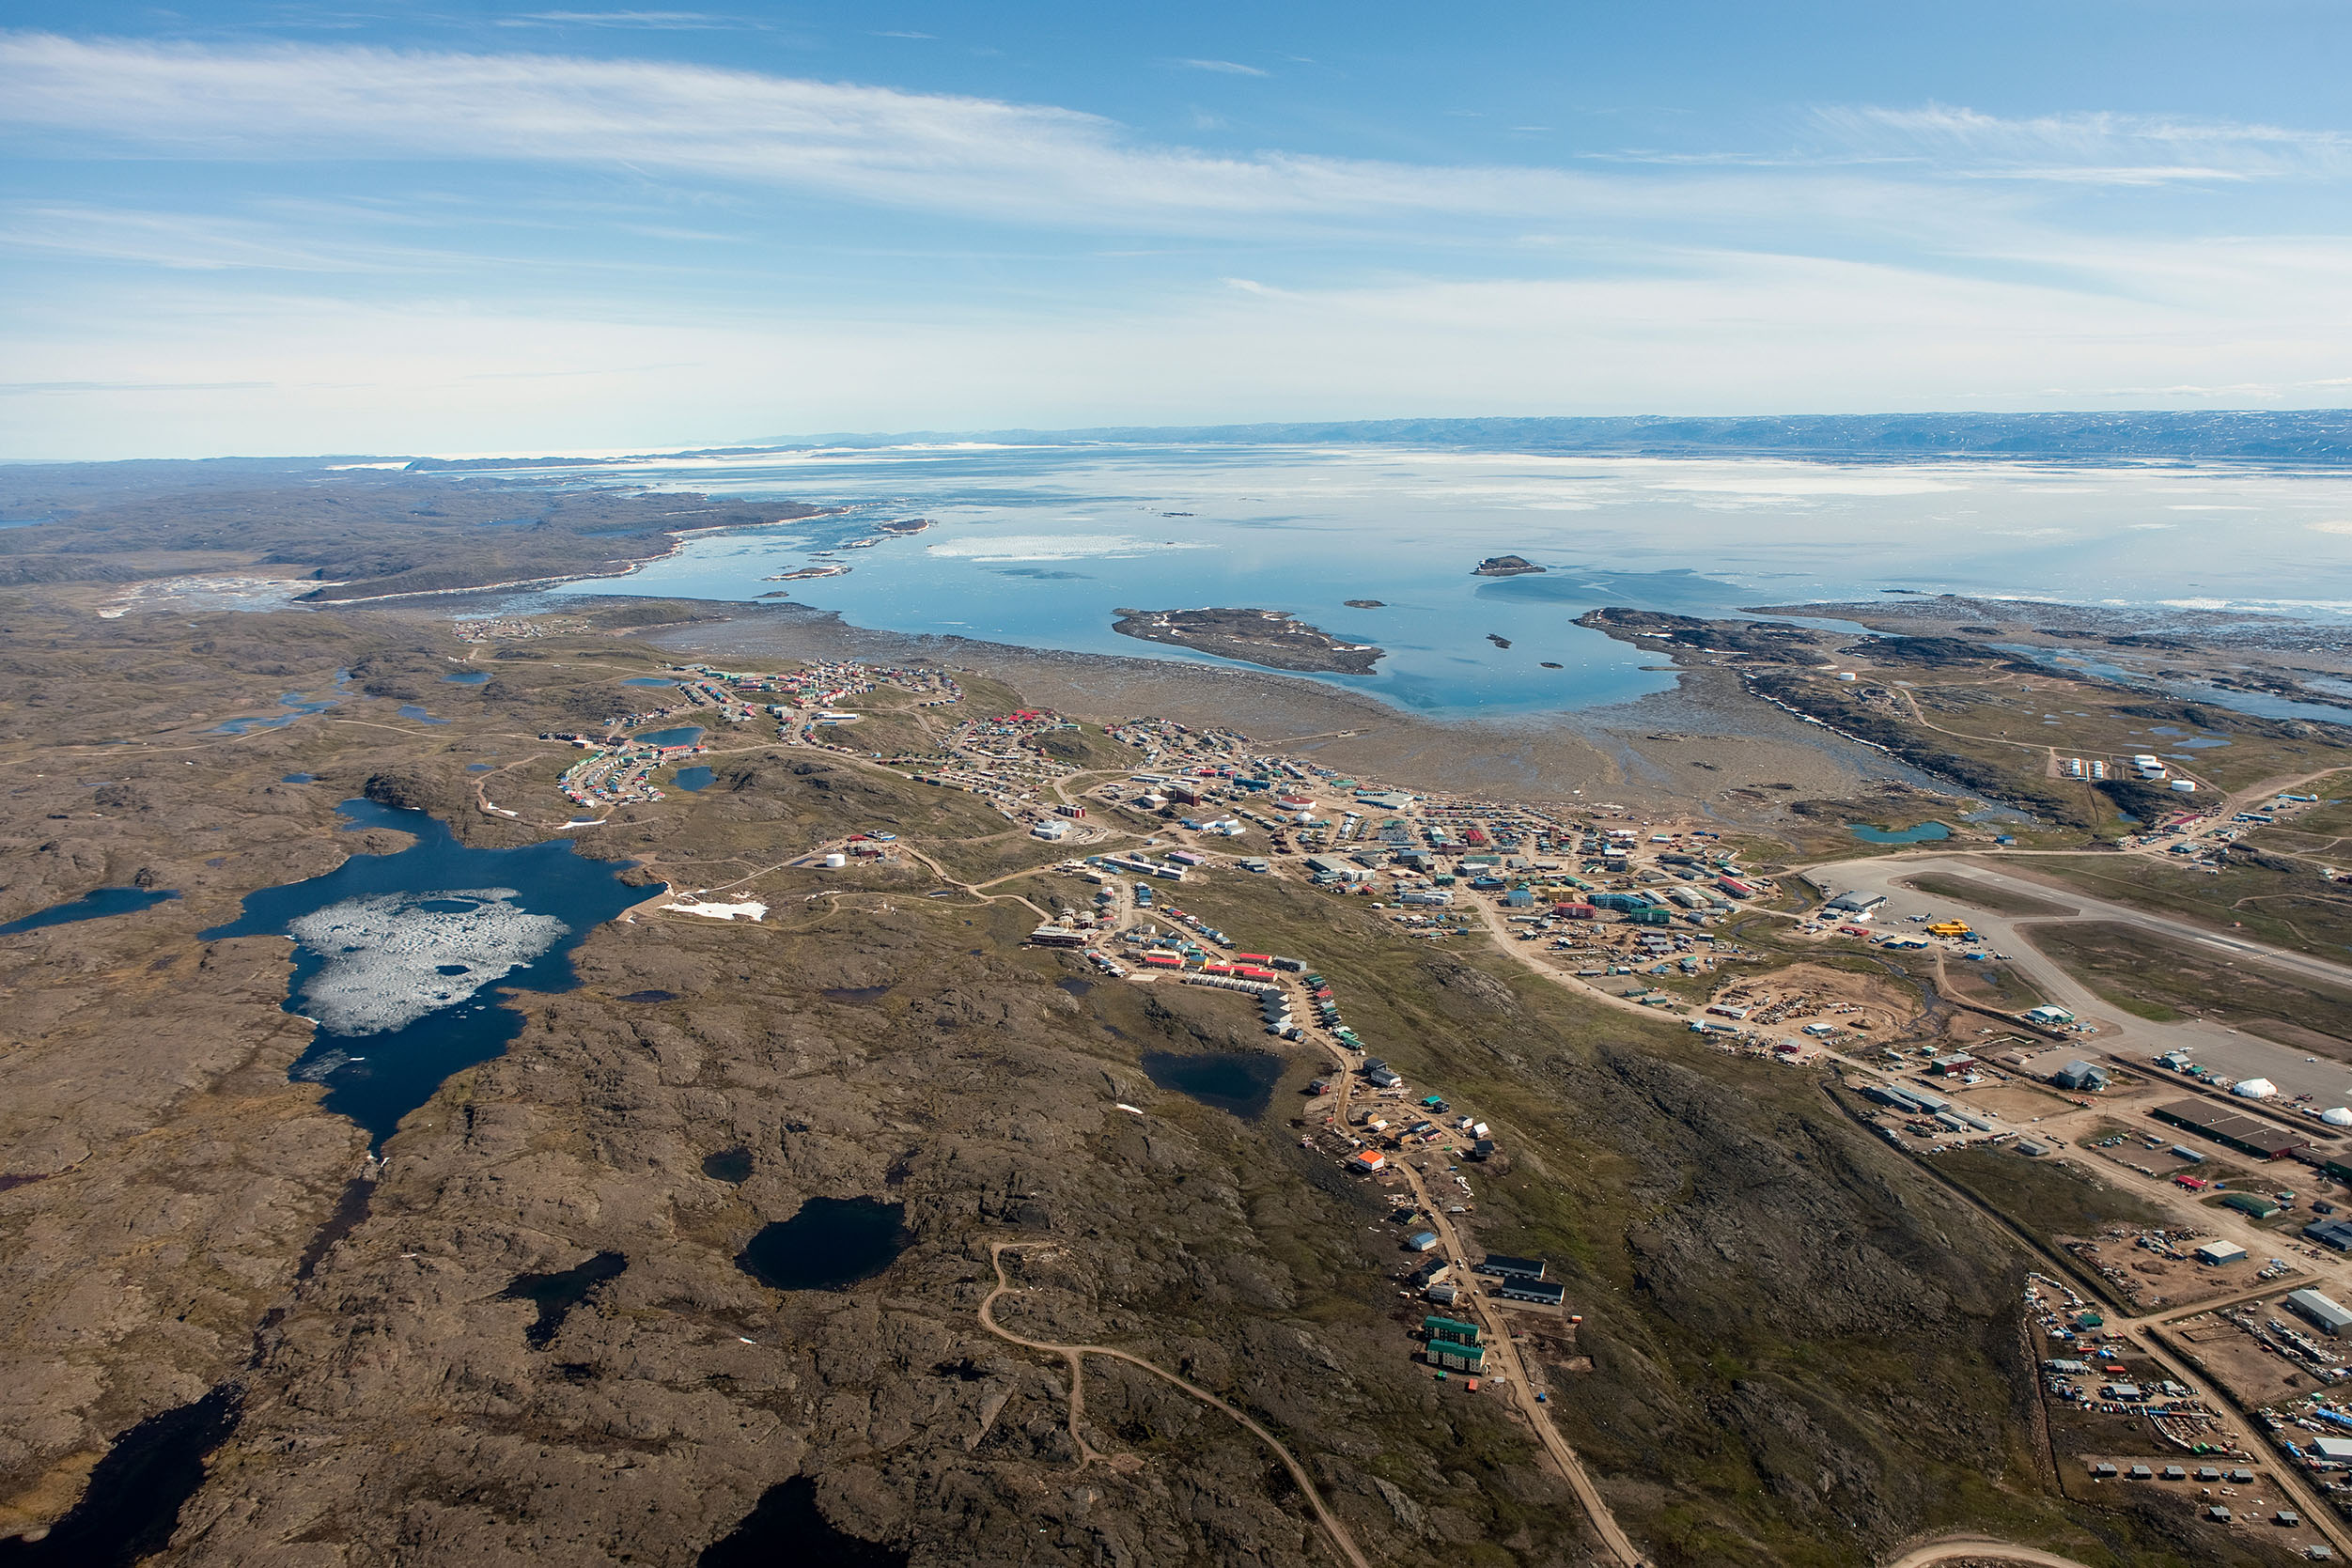 Beautiful and picturesque aerial view of Iqaluit in Nunavut with Frobisher Bay in the background.